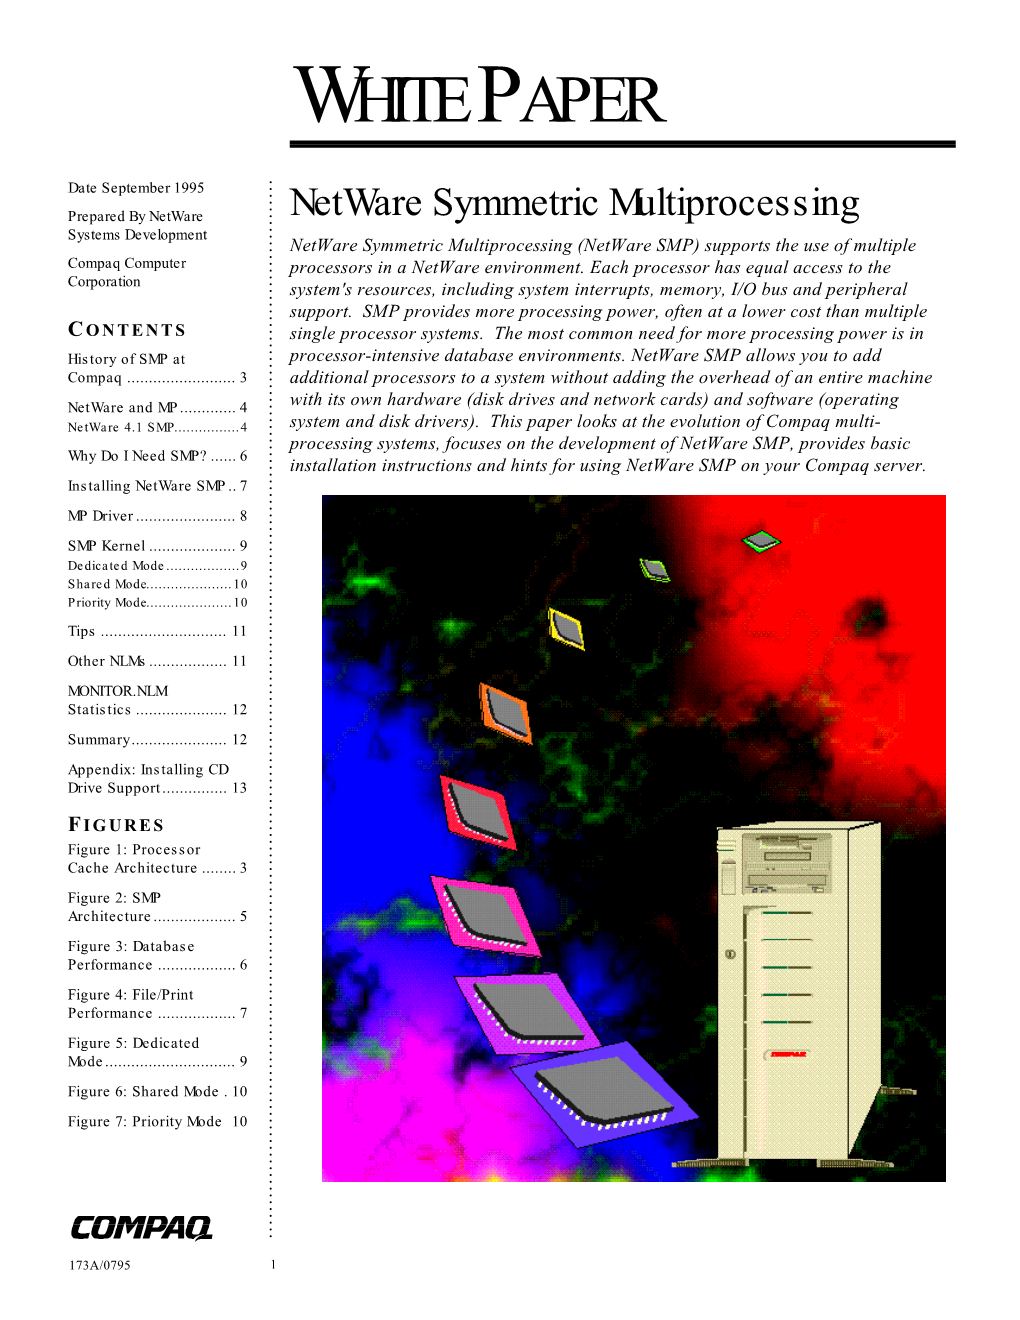 Netware Symmetric Multiprocessing Prepared by Netware